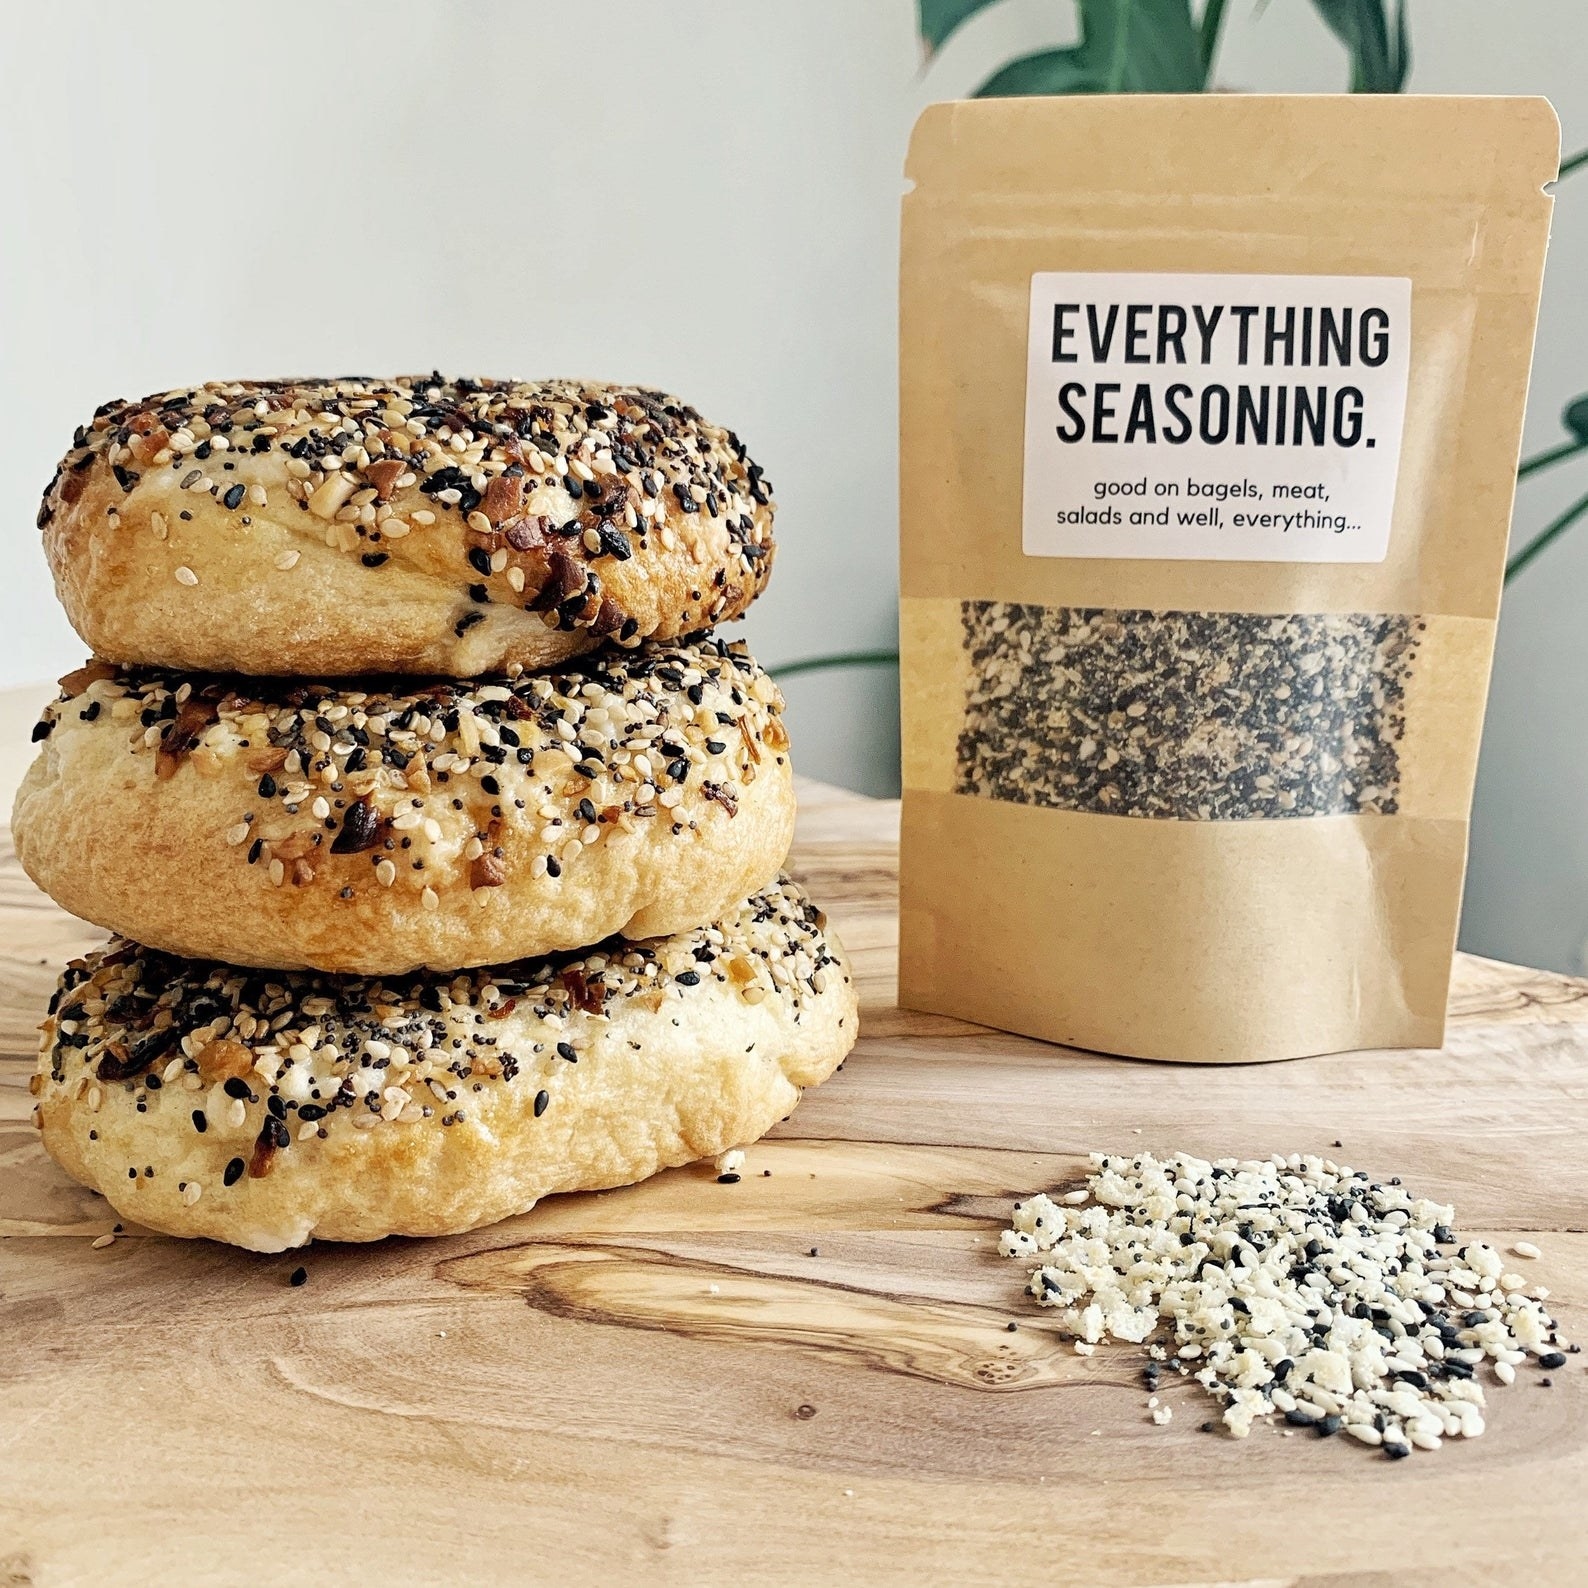 The seasoning package next to a stack of bagels